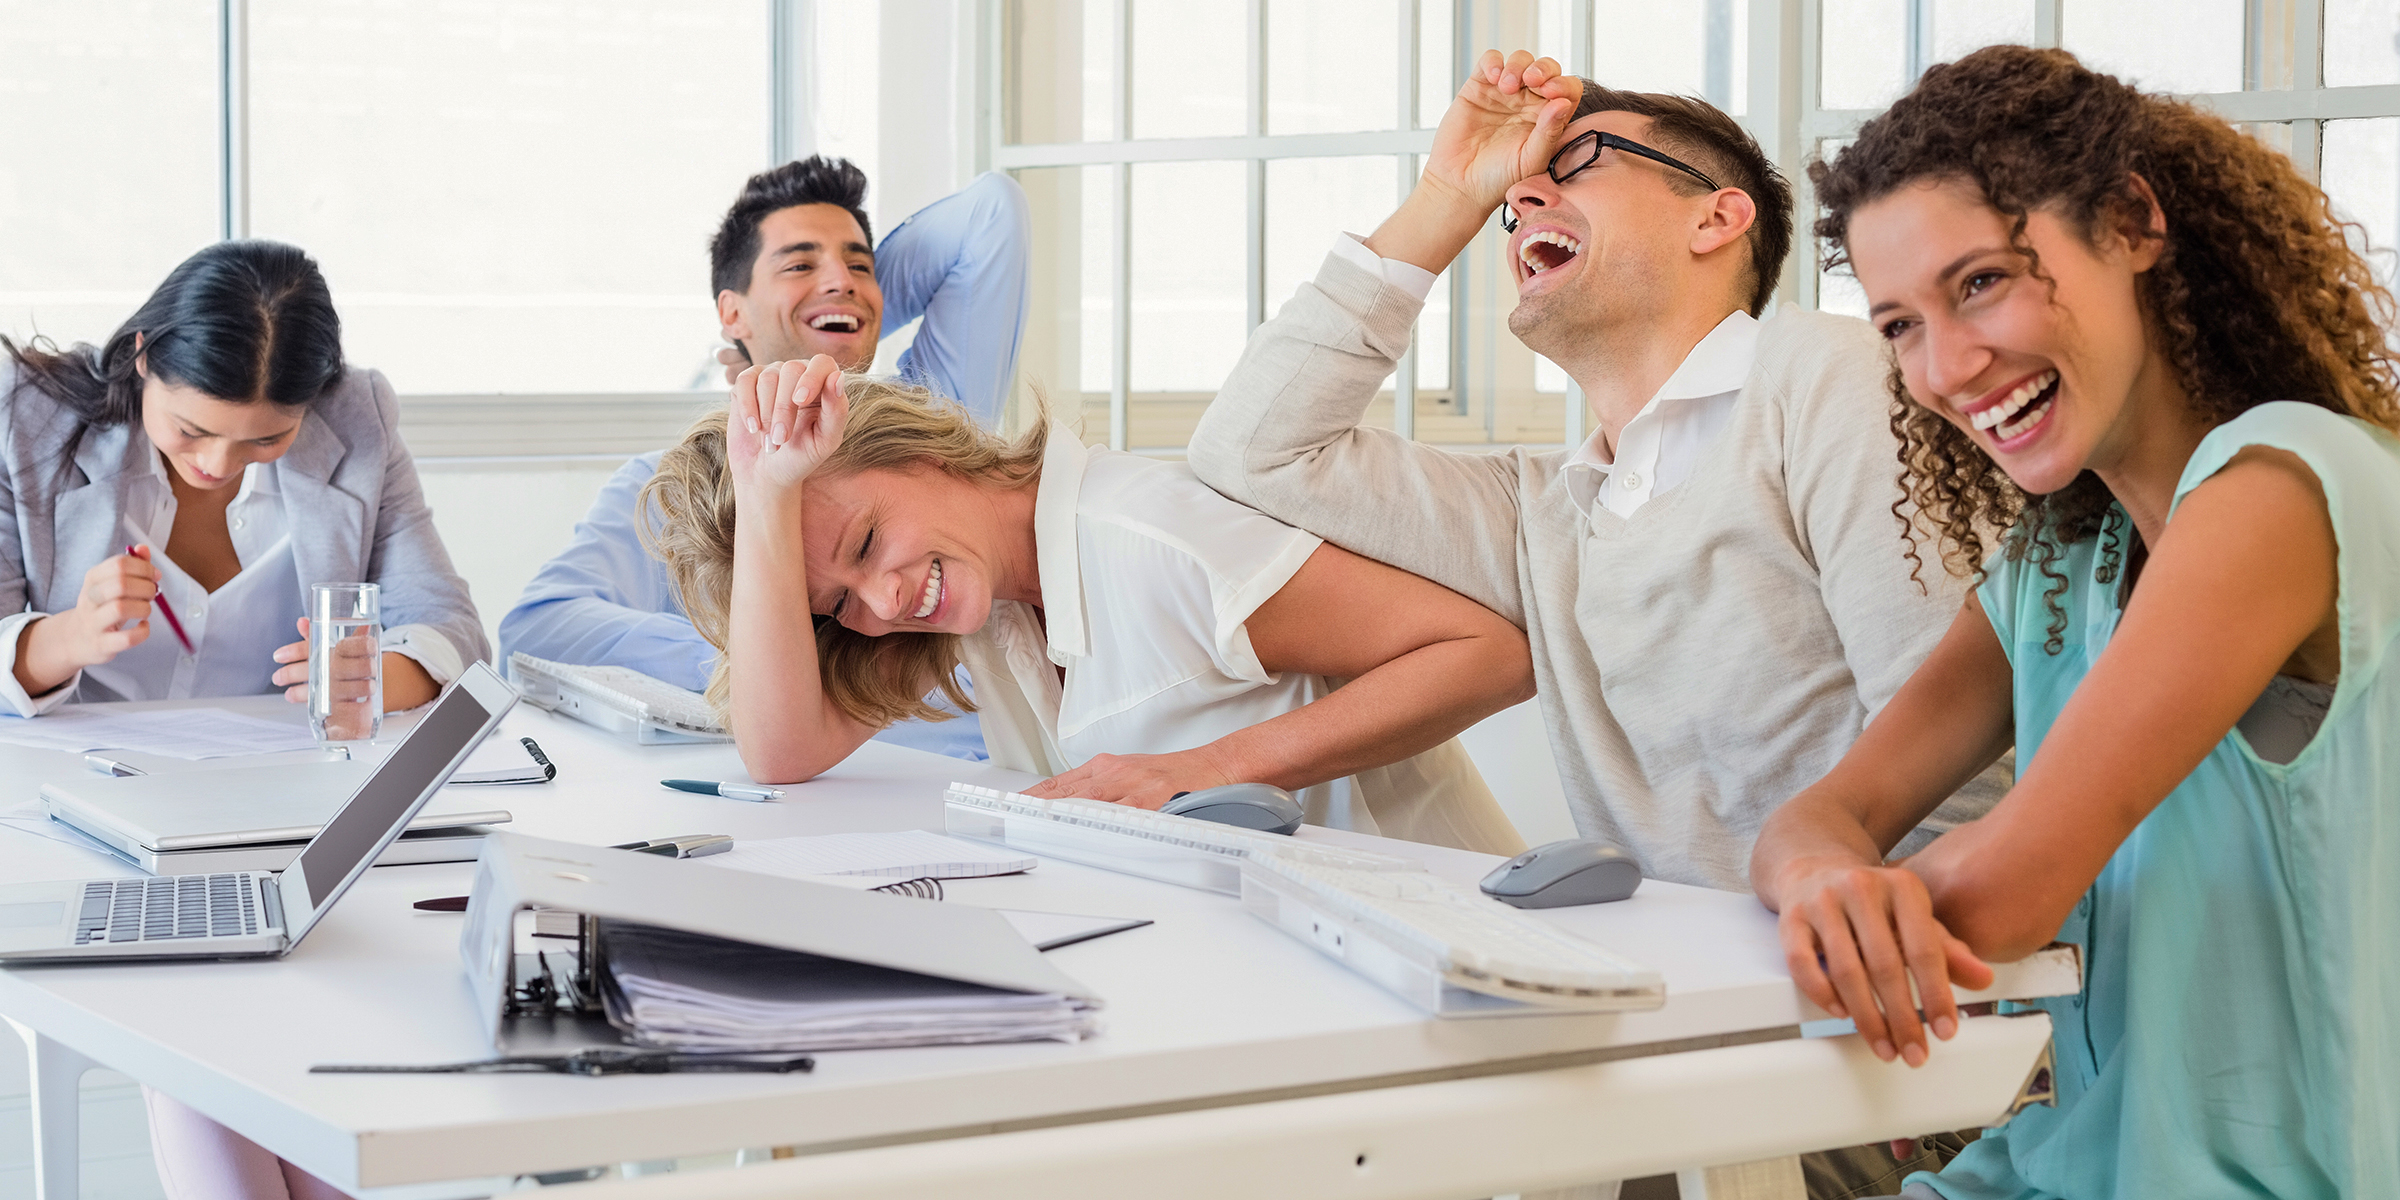 Office workers laughing during a meeting. | Source: Shutterstock